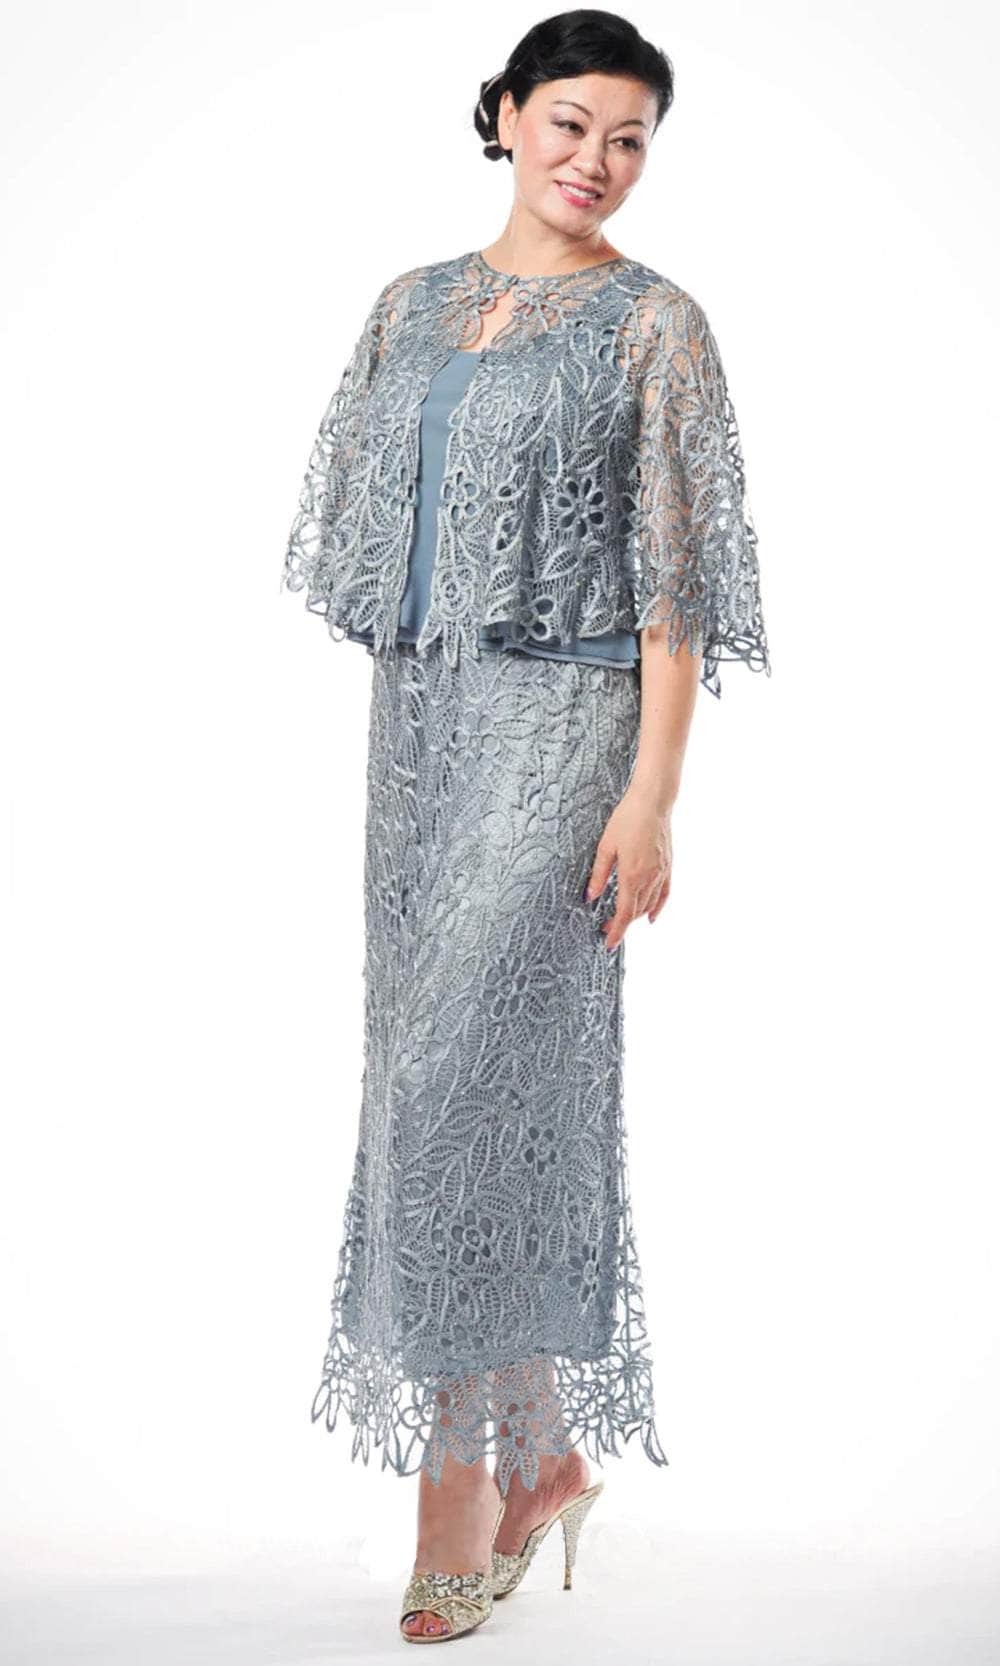 Soulmates C80312 - Beaded Lace Cape Top And Skirt Set Clothing Set Frost Blue / S